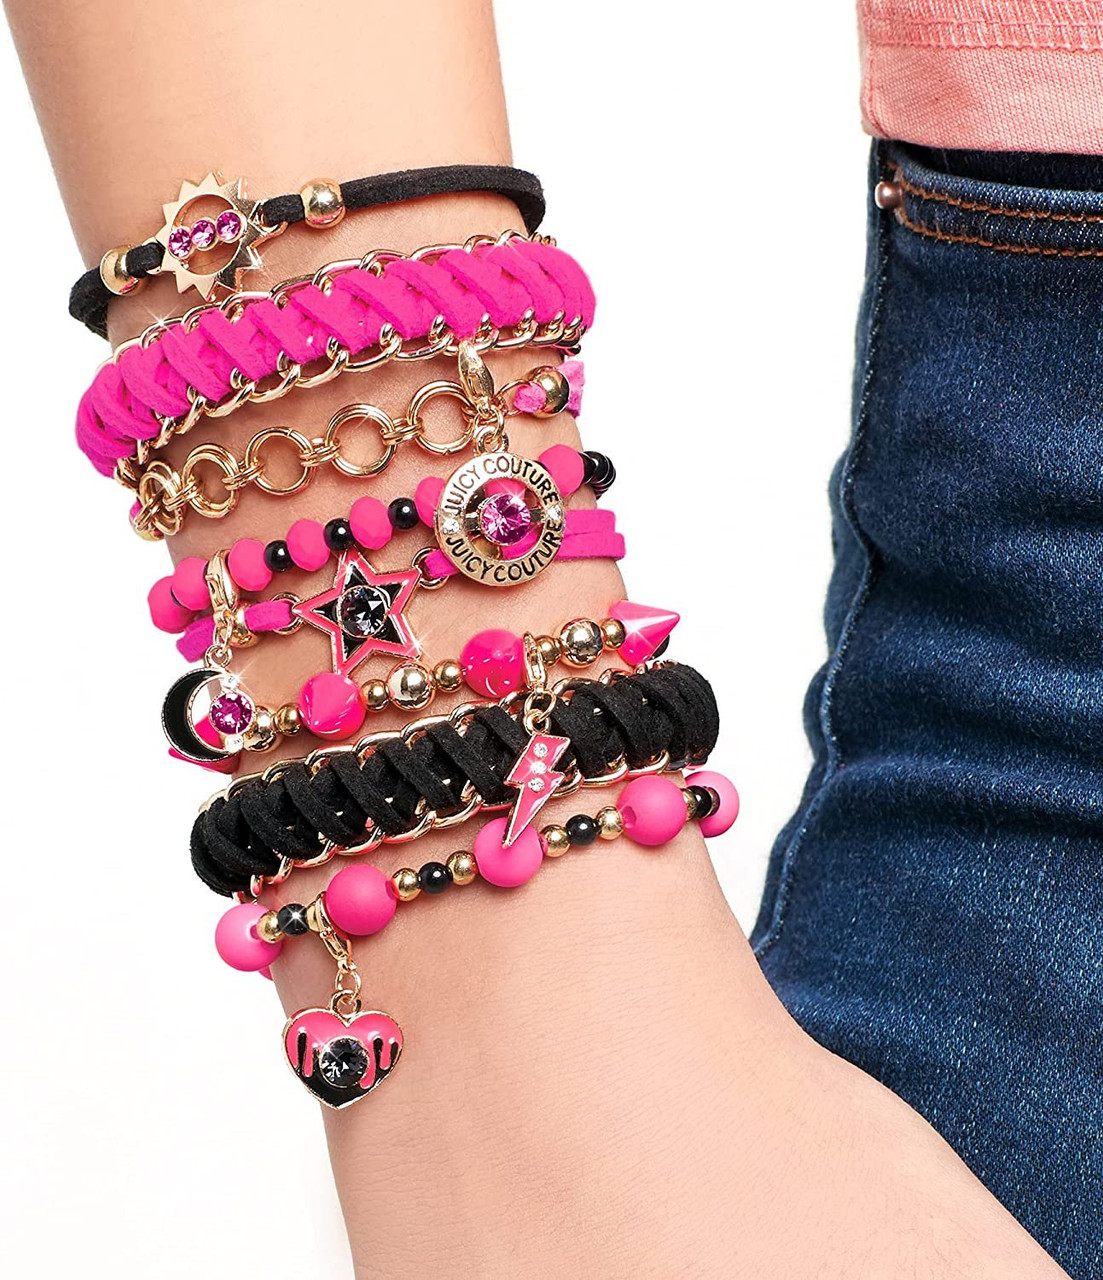 Make It Real – Juicy Couture Chains & Charms. DIY Charm Bracelet Making Kit  for Girls 